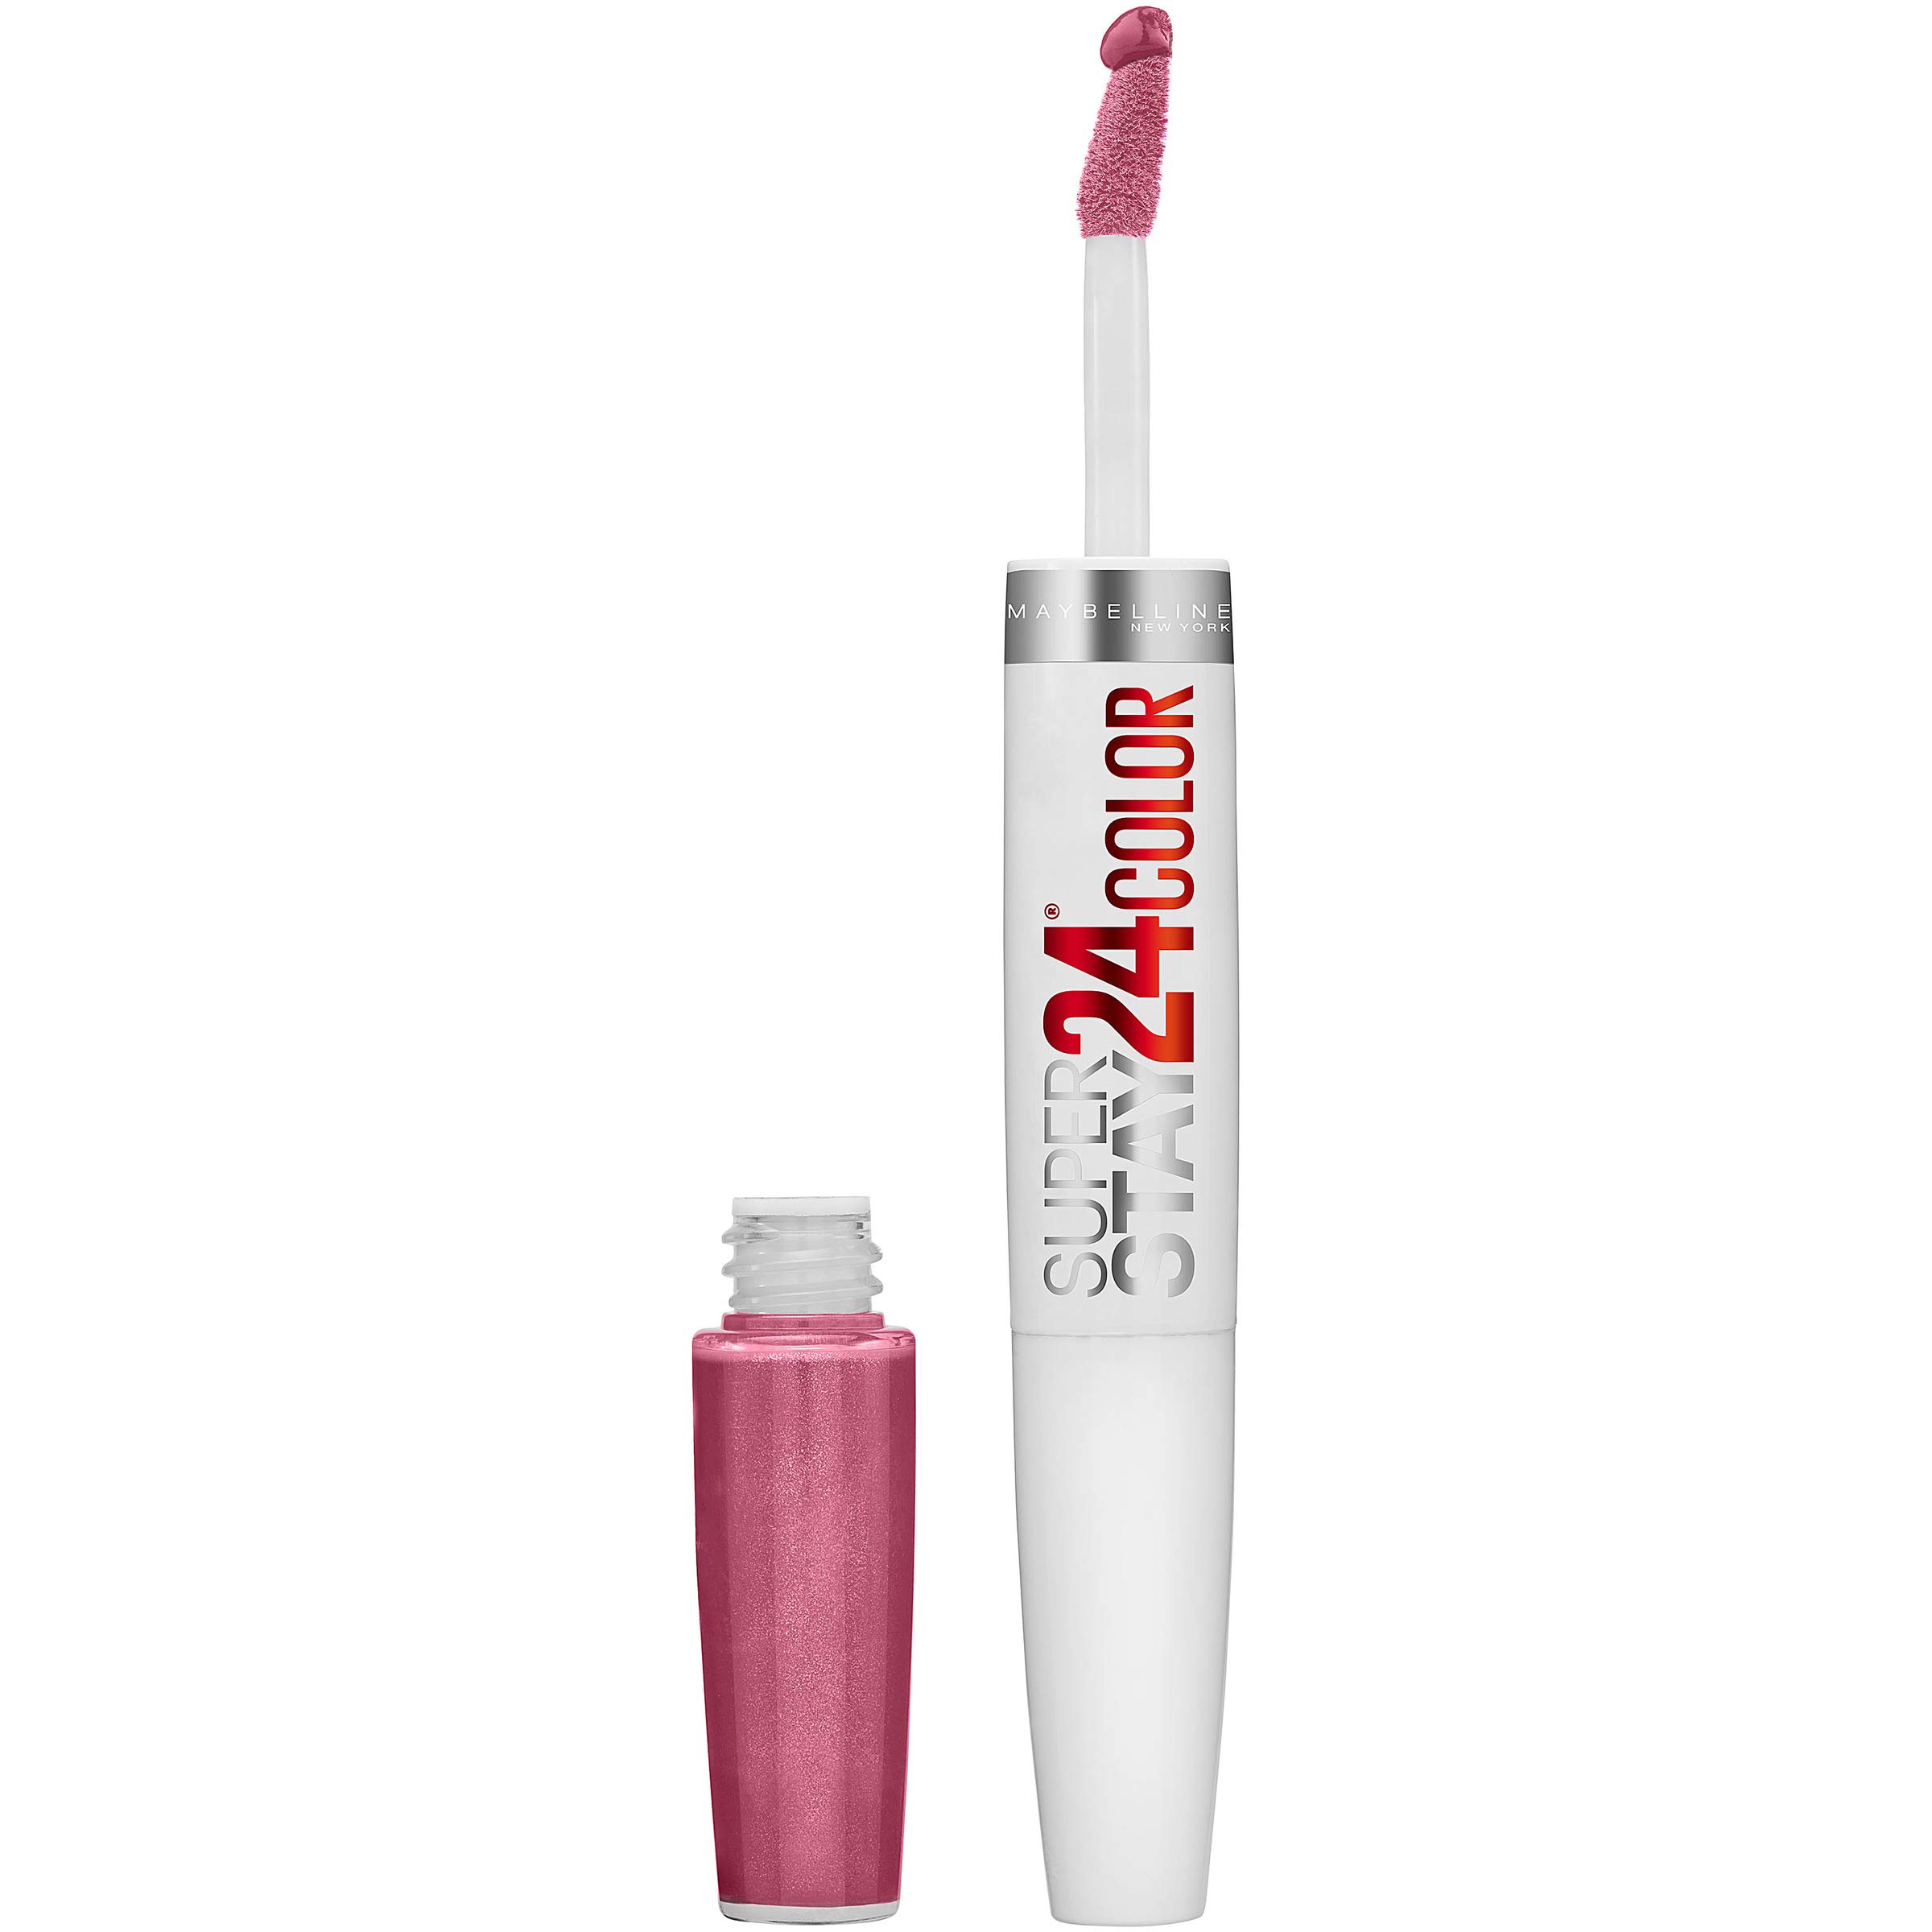 Maybelline New York Super Stay 24 Color 2-Step Lipcolor, Very Cranberry, 2.3ml + 1.8g